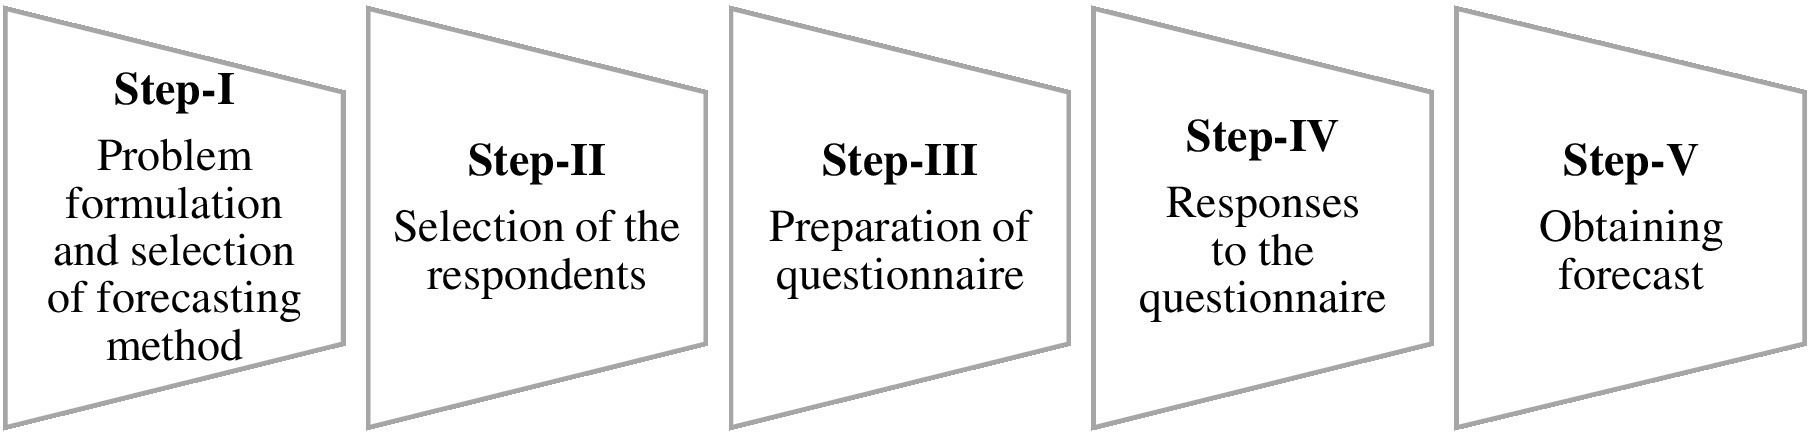 An illustration depicts the steps in obtaining forecast.